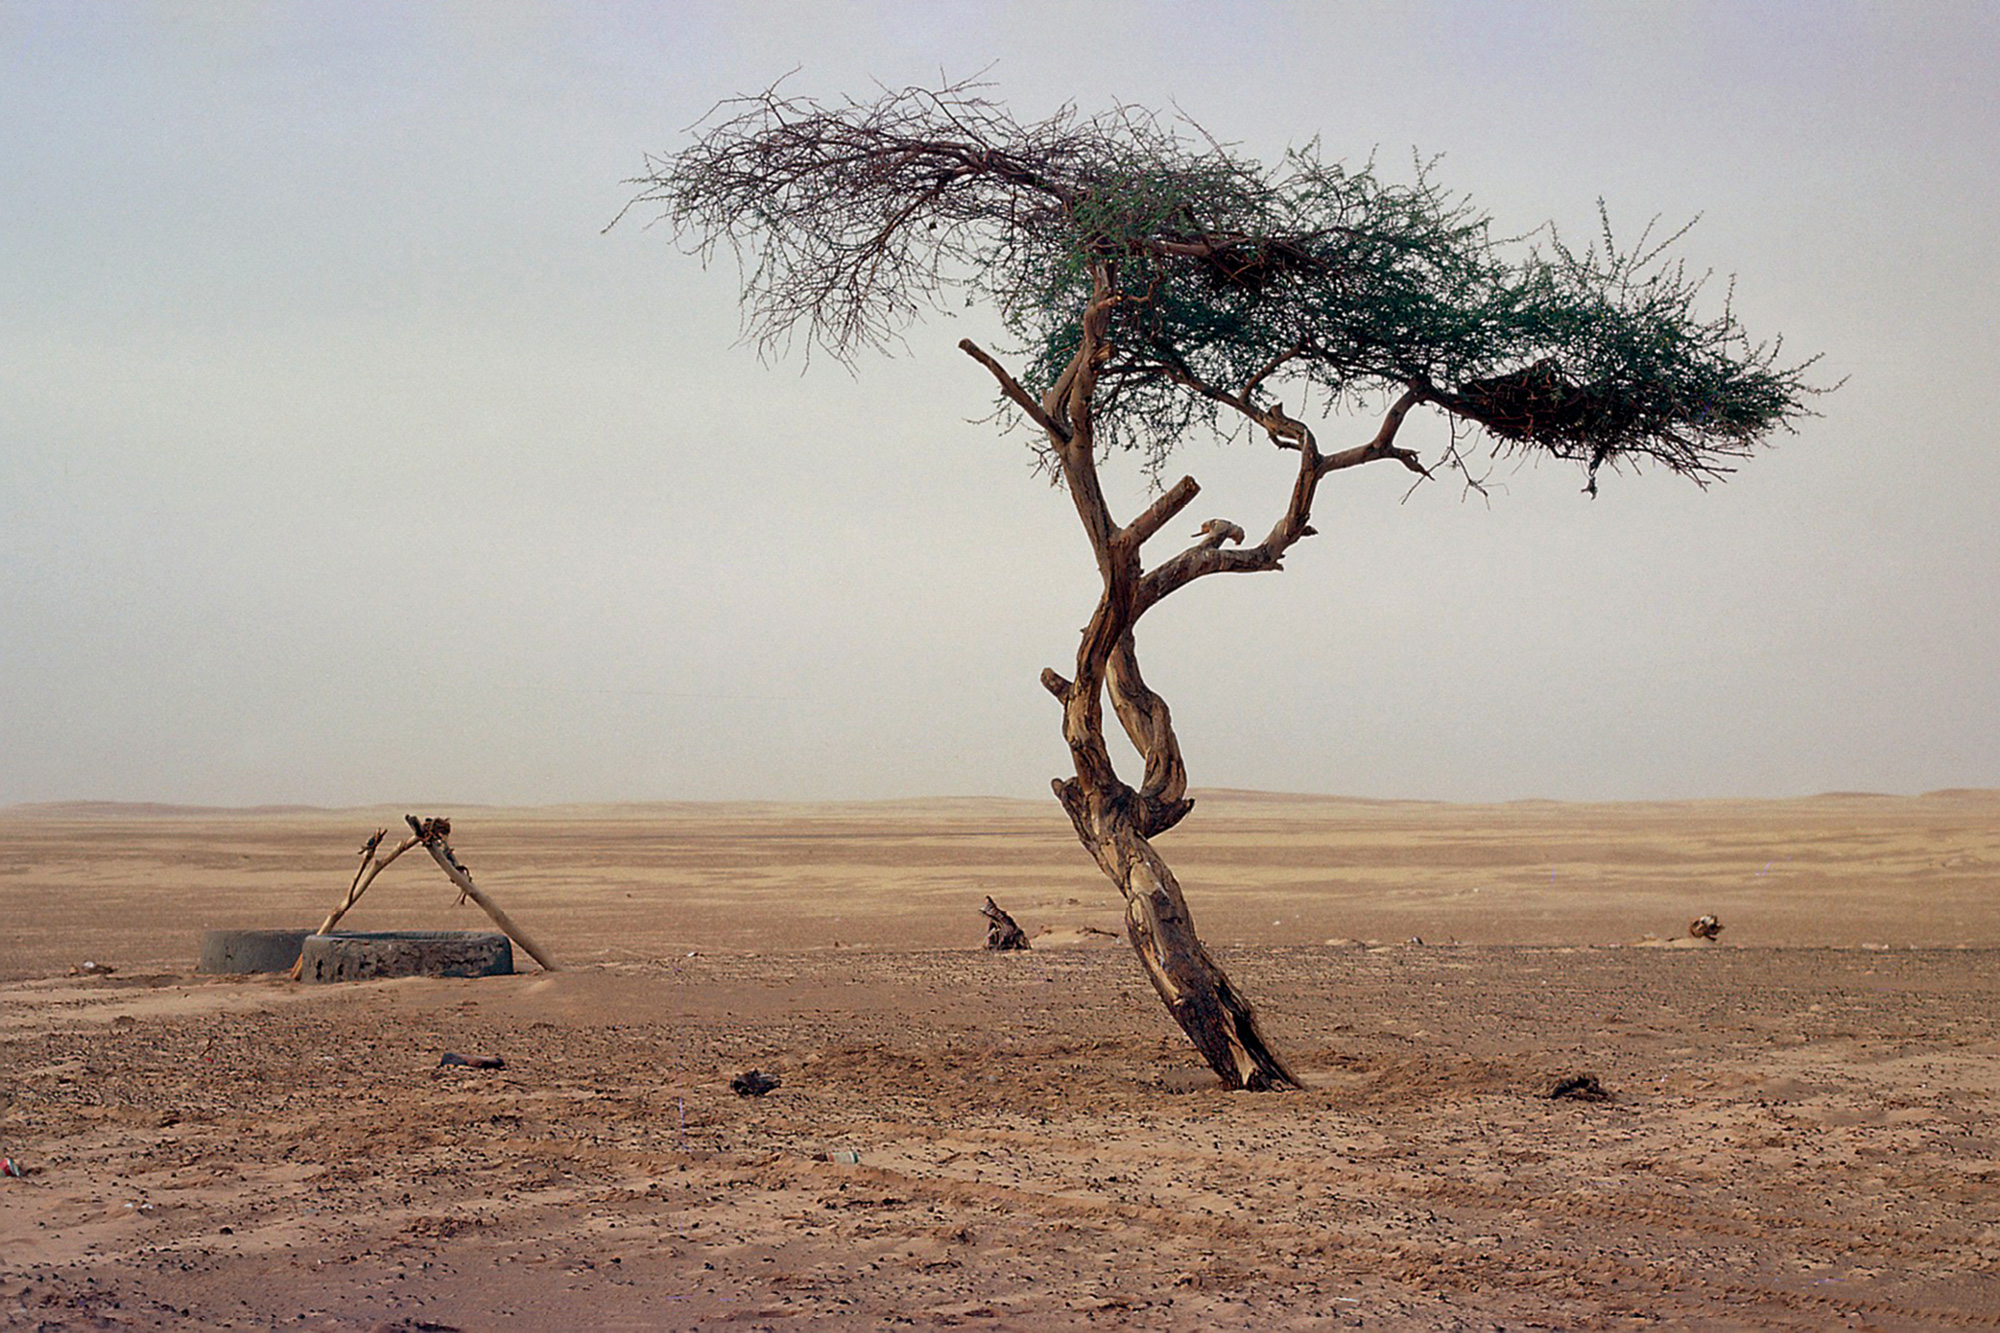 The Tree of Ténéré as it appeared between 1959, when it was first struck by a vehicle, and 1973, when it was finally killed.